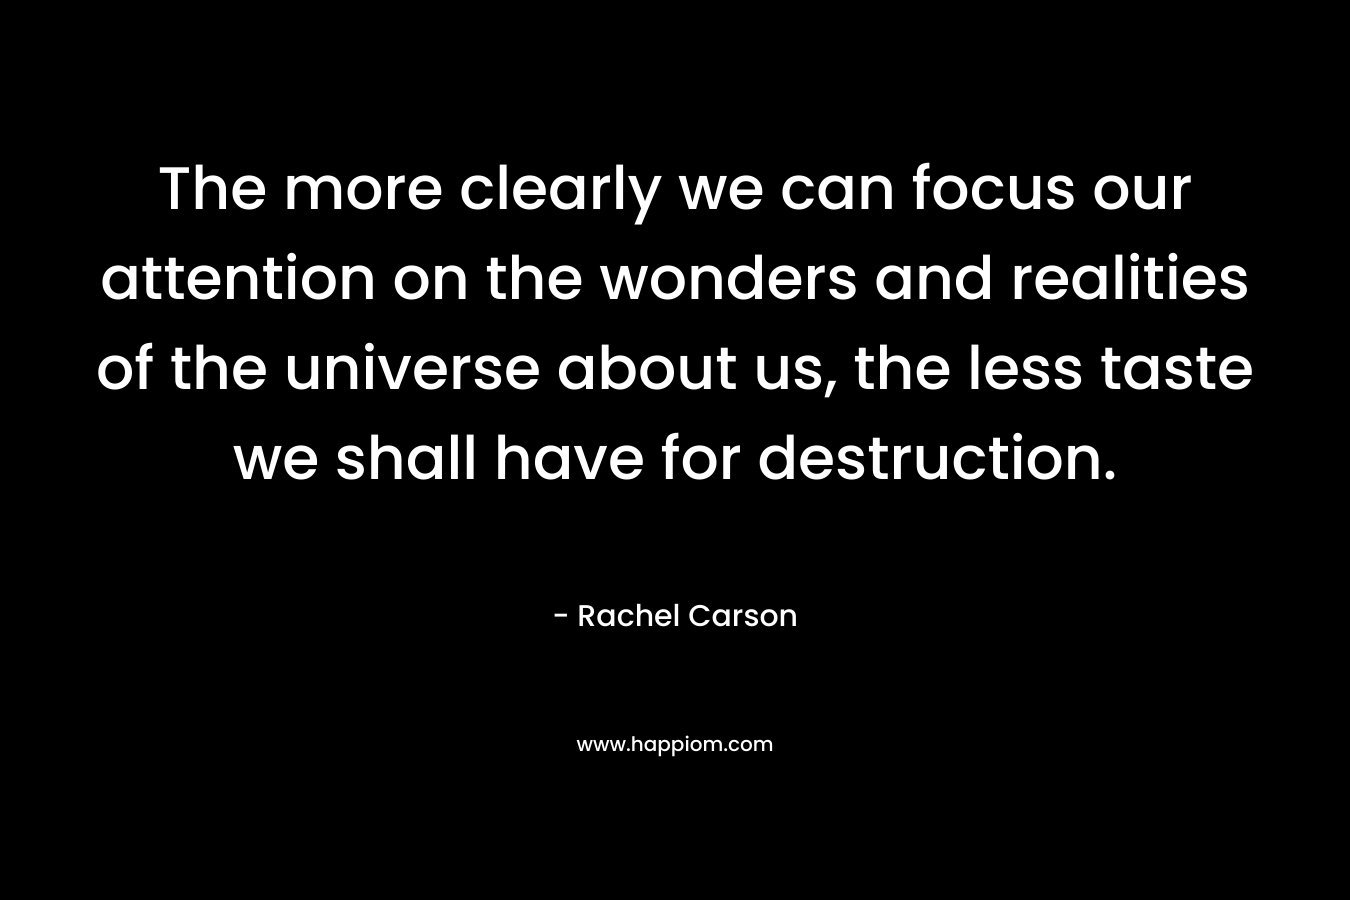 The more clearly we can focus our attention on the wonders and realities of the universe about us, the less taste we shall have for destruction. – Rachel Carson